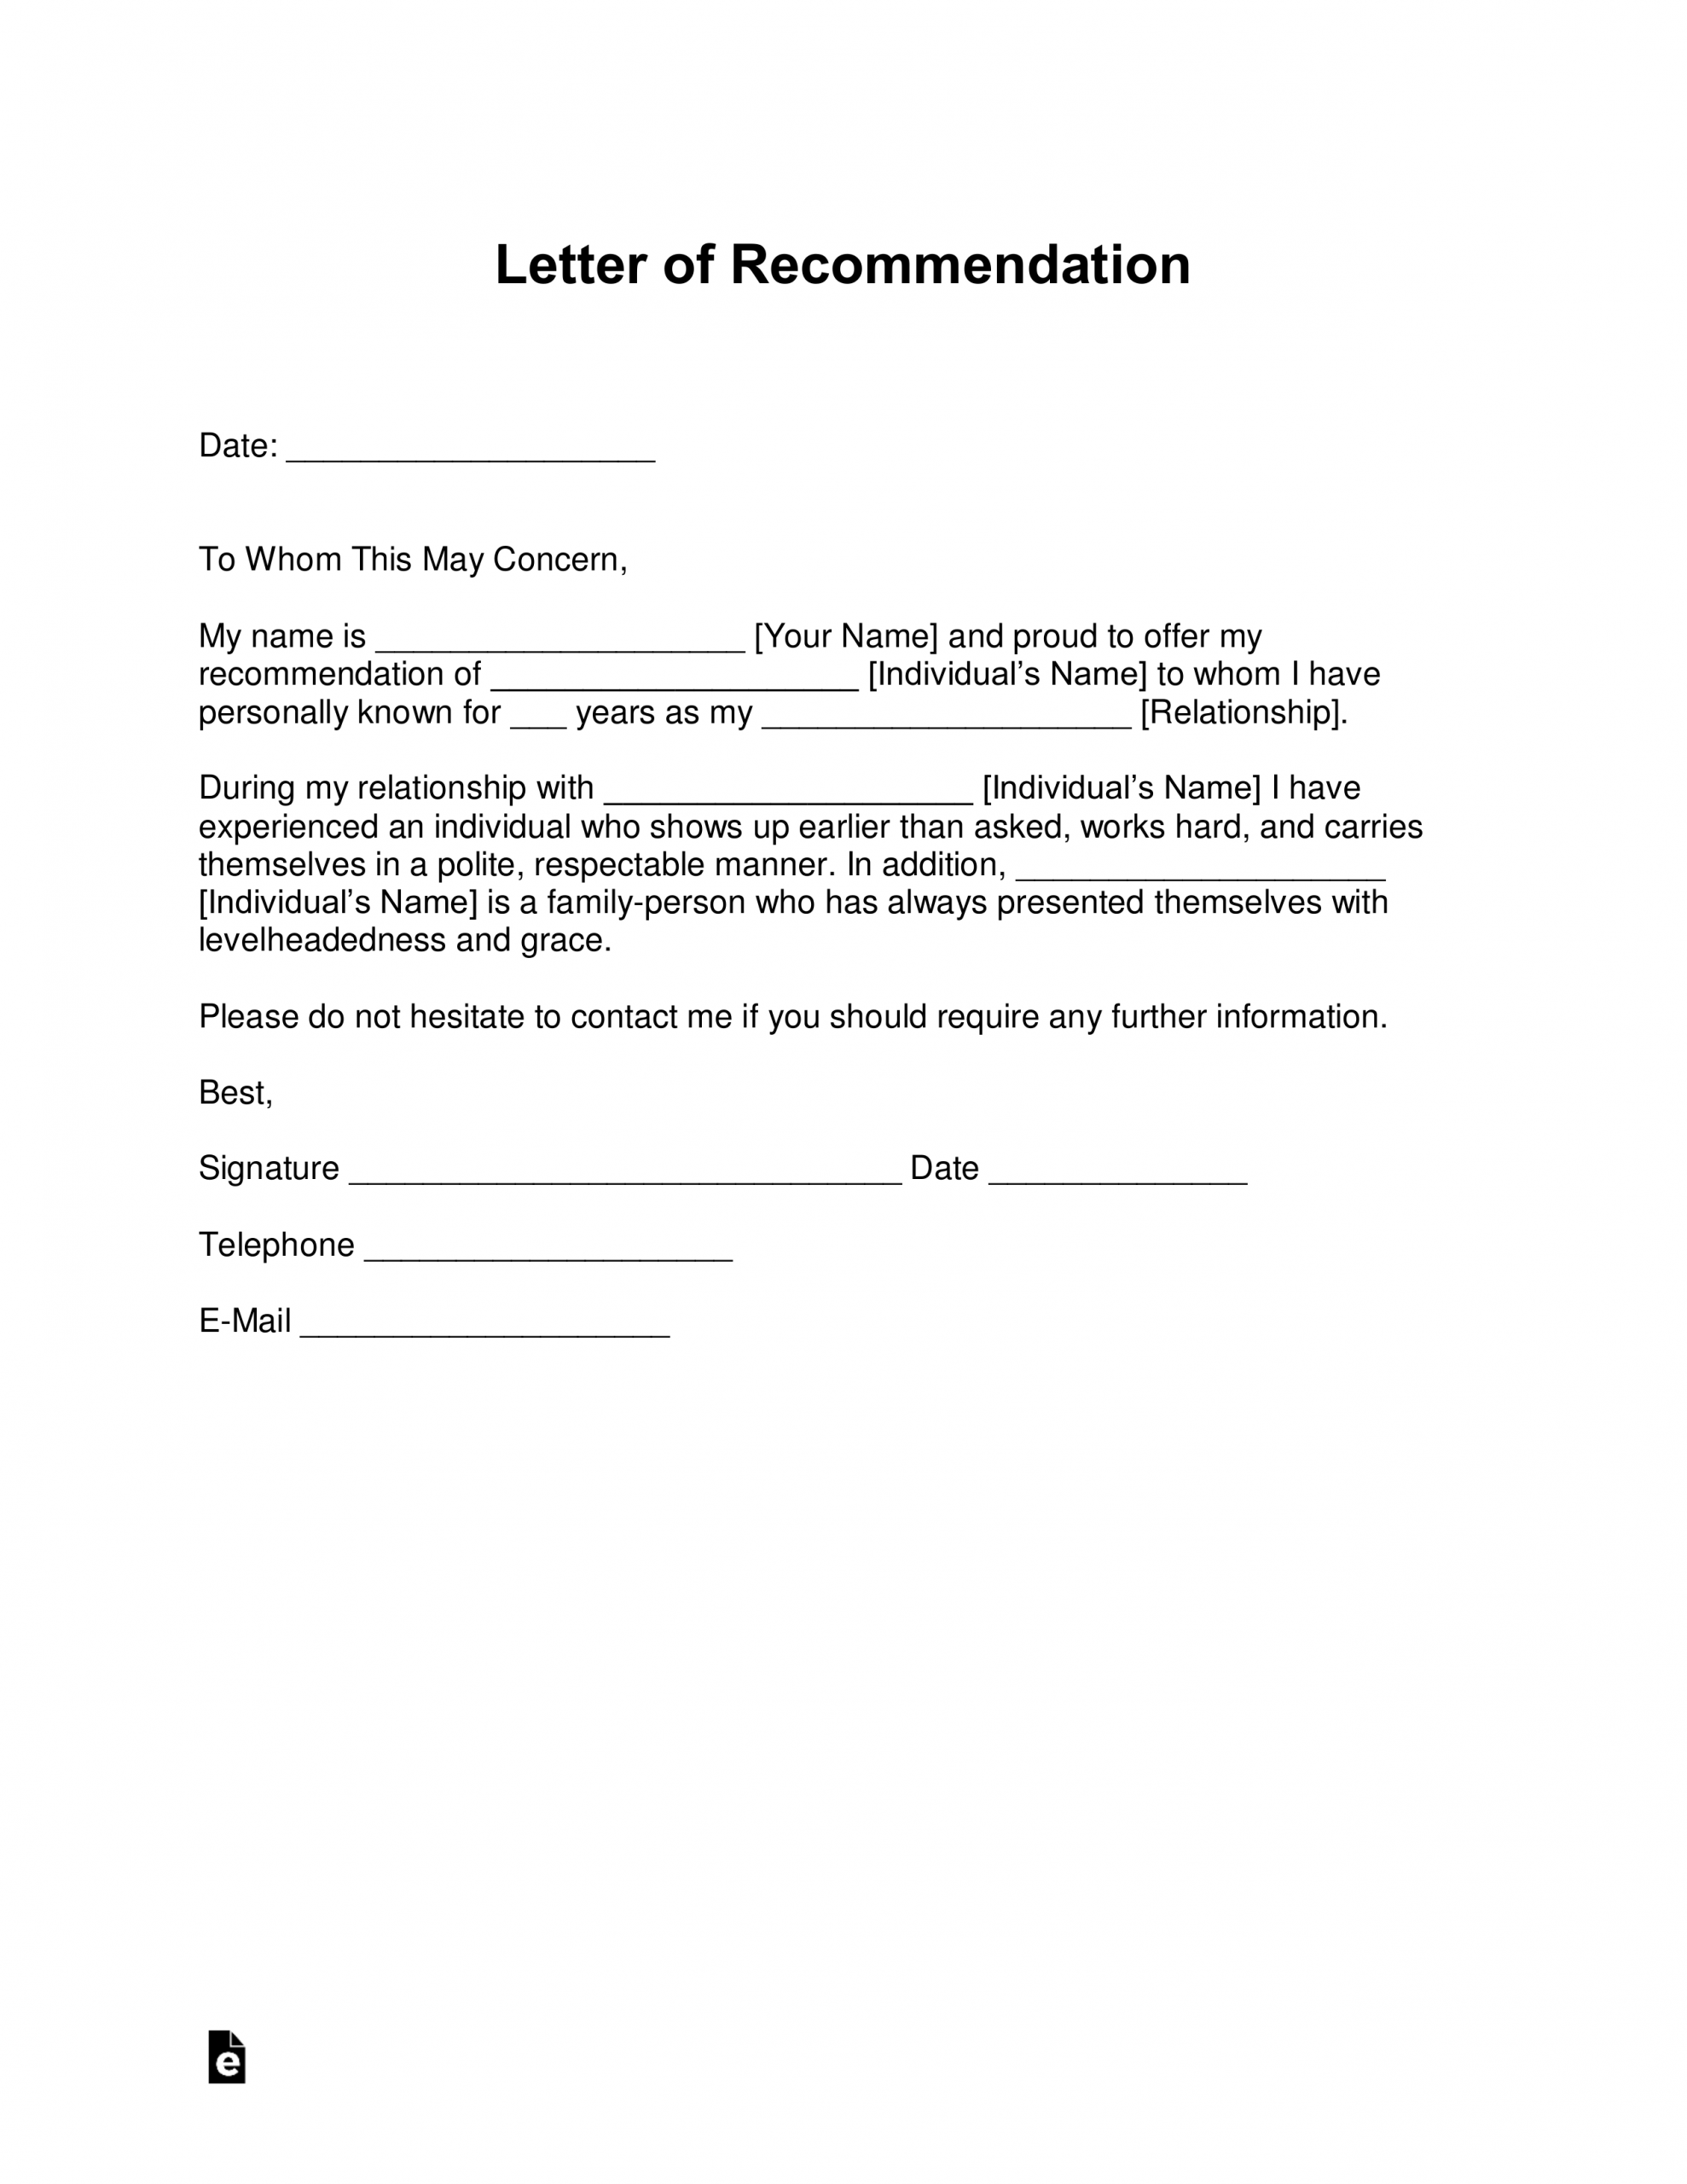 Free Letter Of Recommendation Templates Samples And for measurements 2550 X 3301